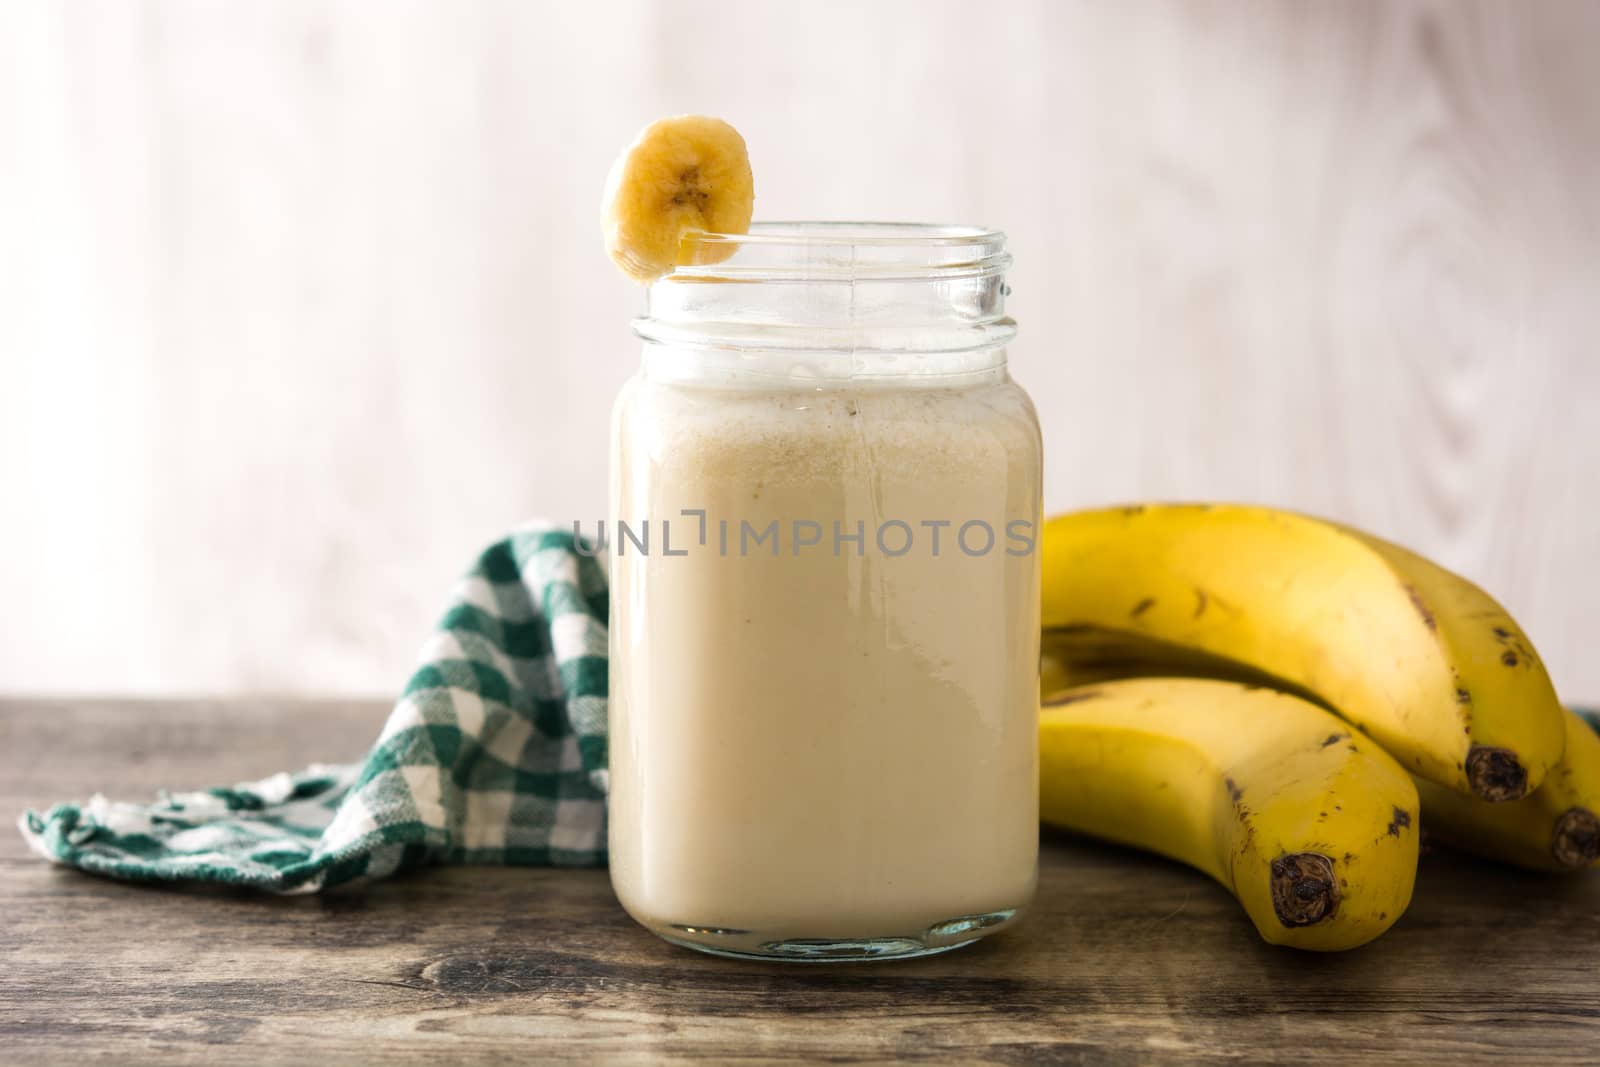 Banana smoothie in jar by chandlervid85